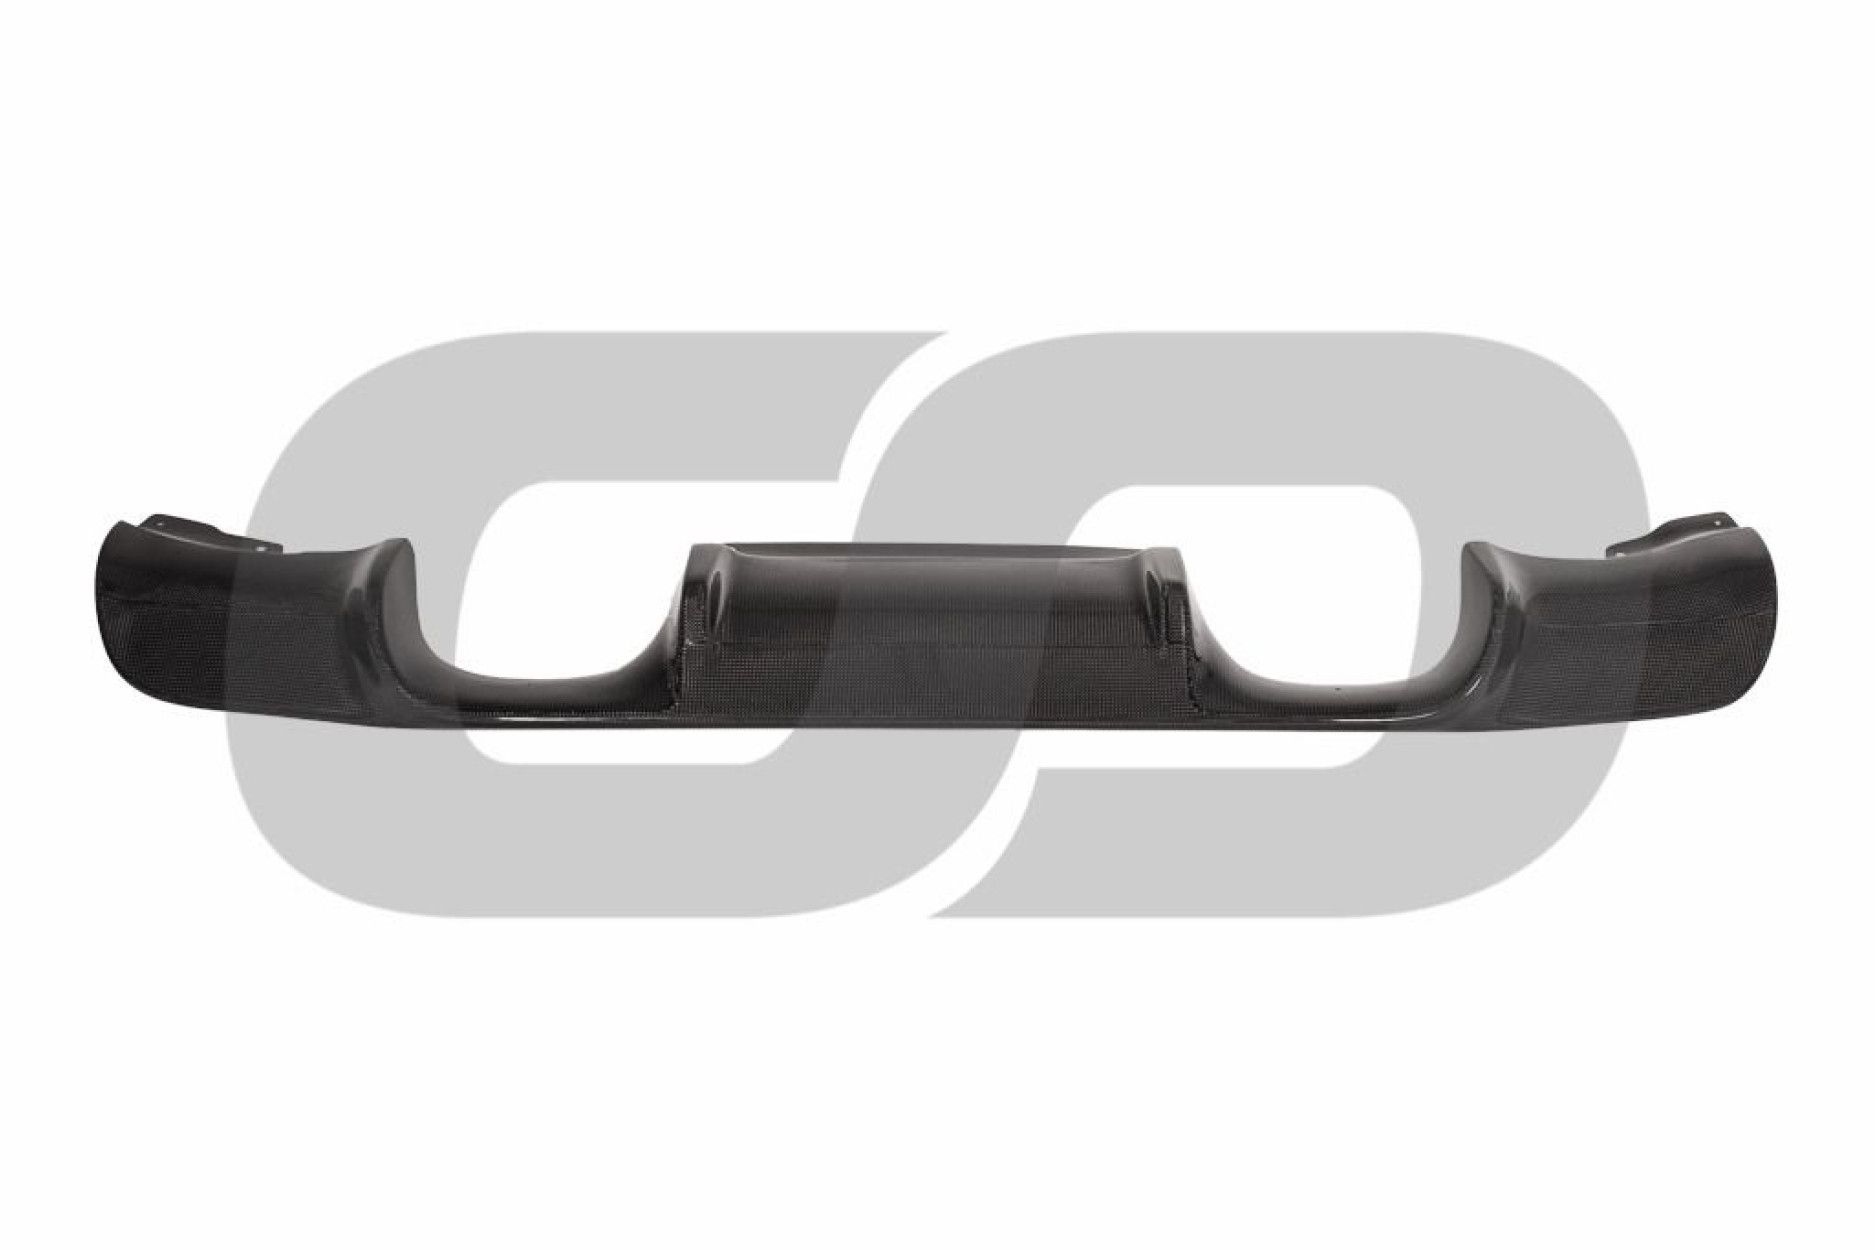 3Ddesign carbon diffuser fitting for BMW 3 Series E90 M3 (5) 